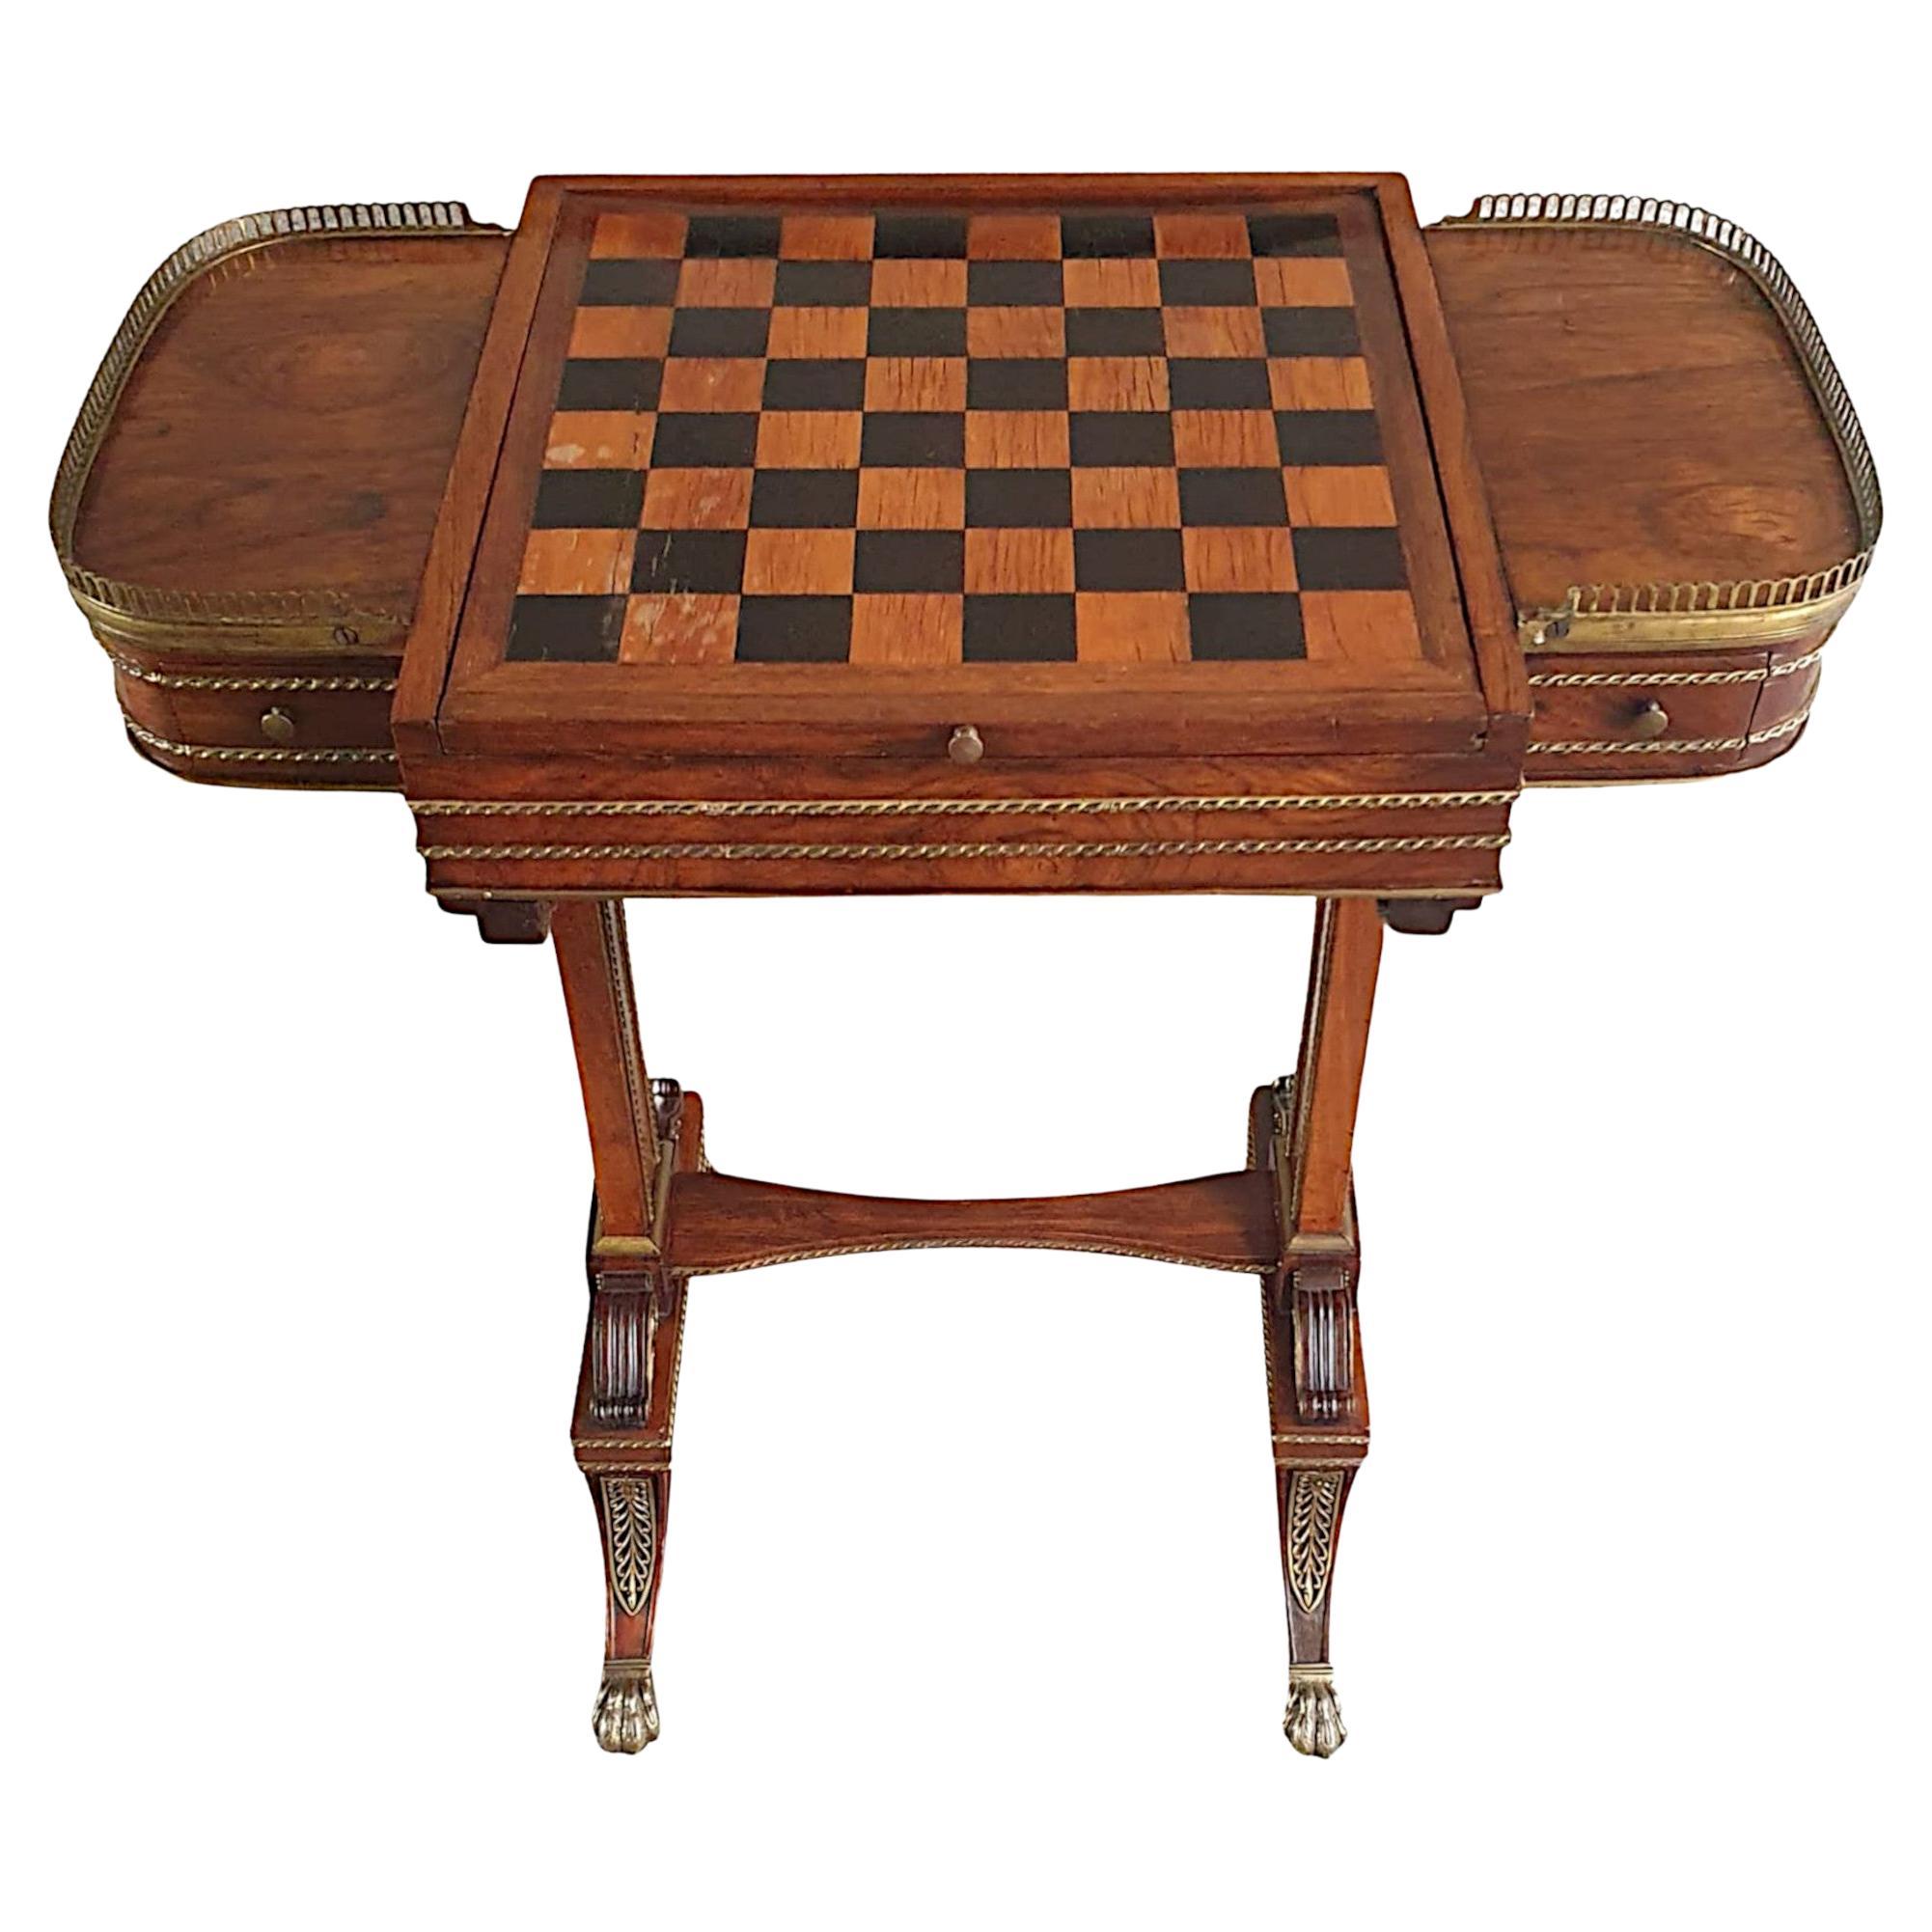 Rare Early 19th Century Regency Combination Games or Work Table For Sale